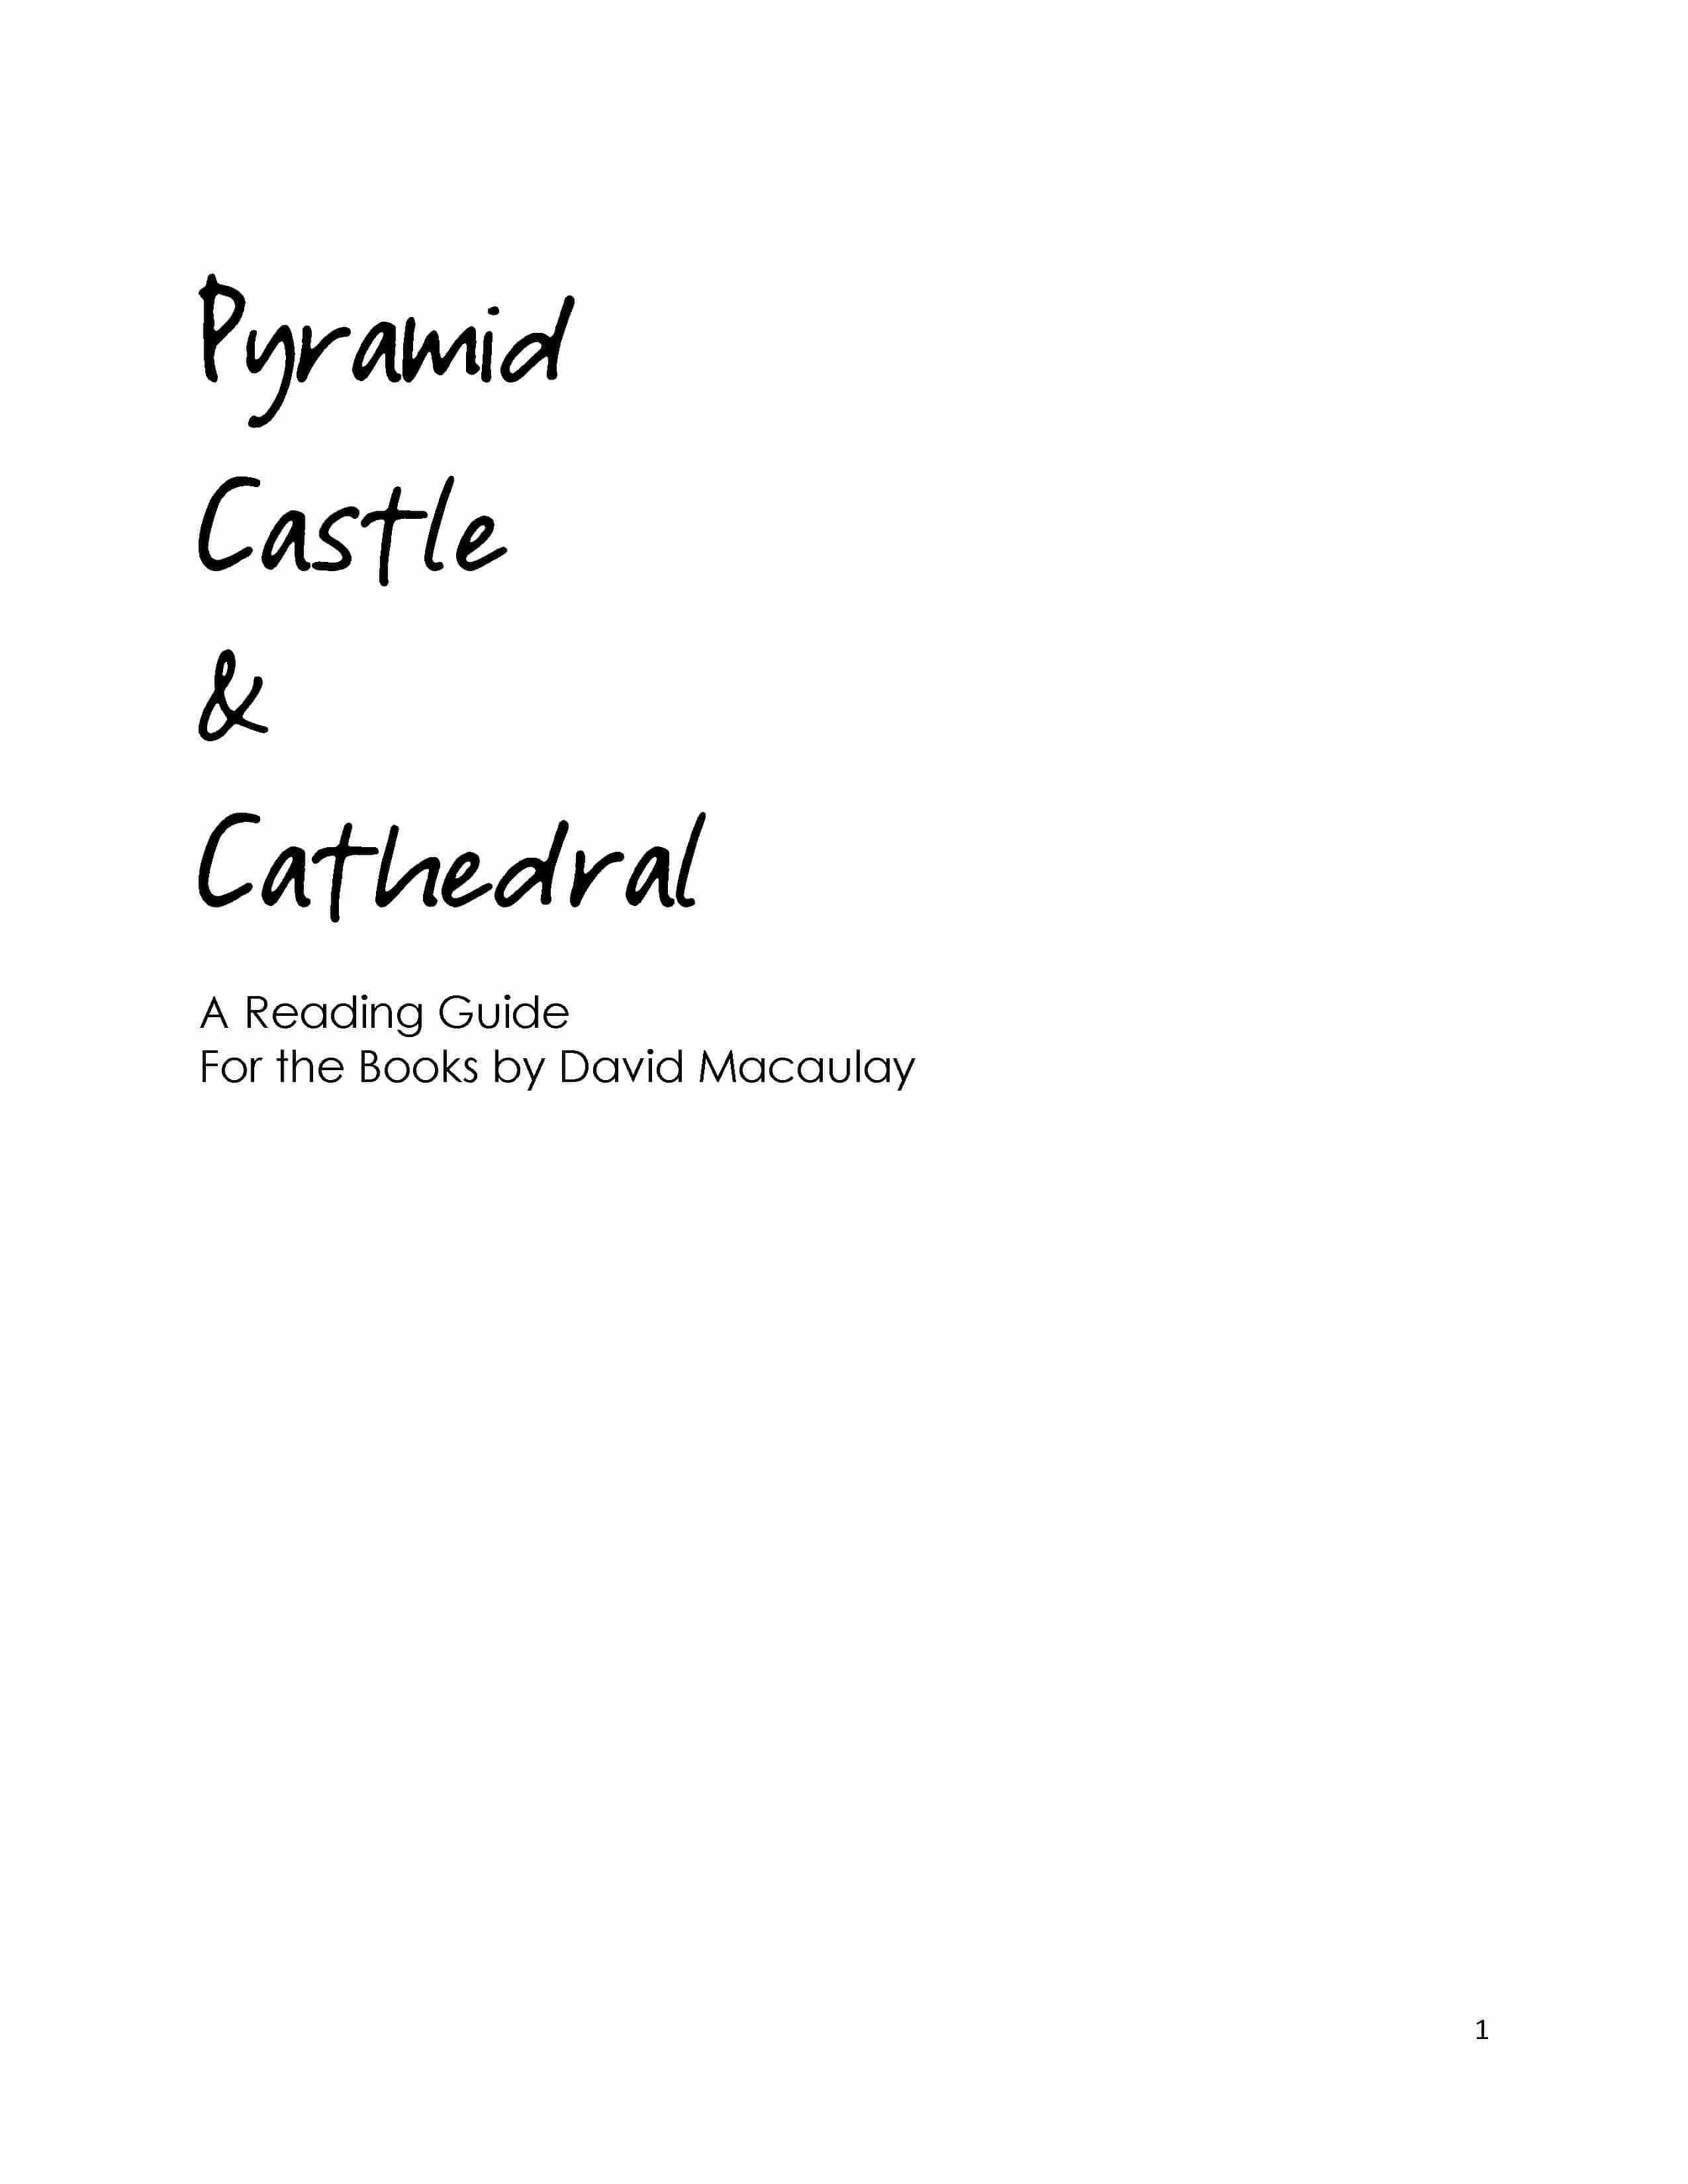 Pyramid, Castle & Cathedral (Three Books by David Macaulay) - Reading Guide (Download)